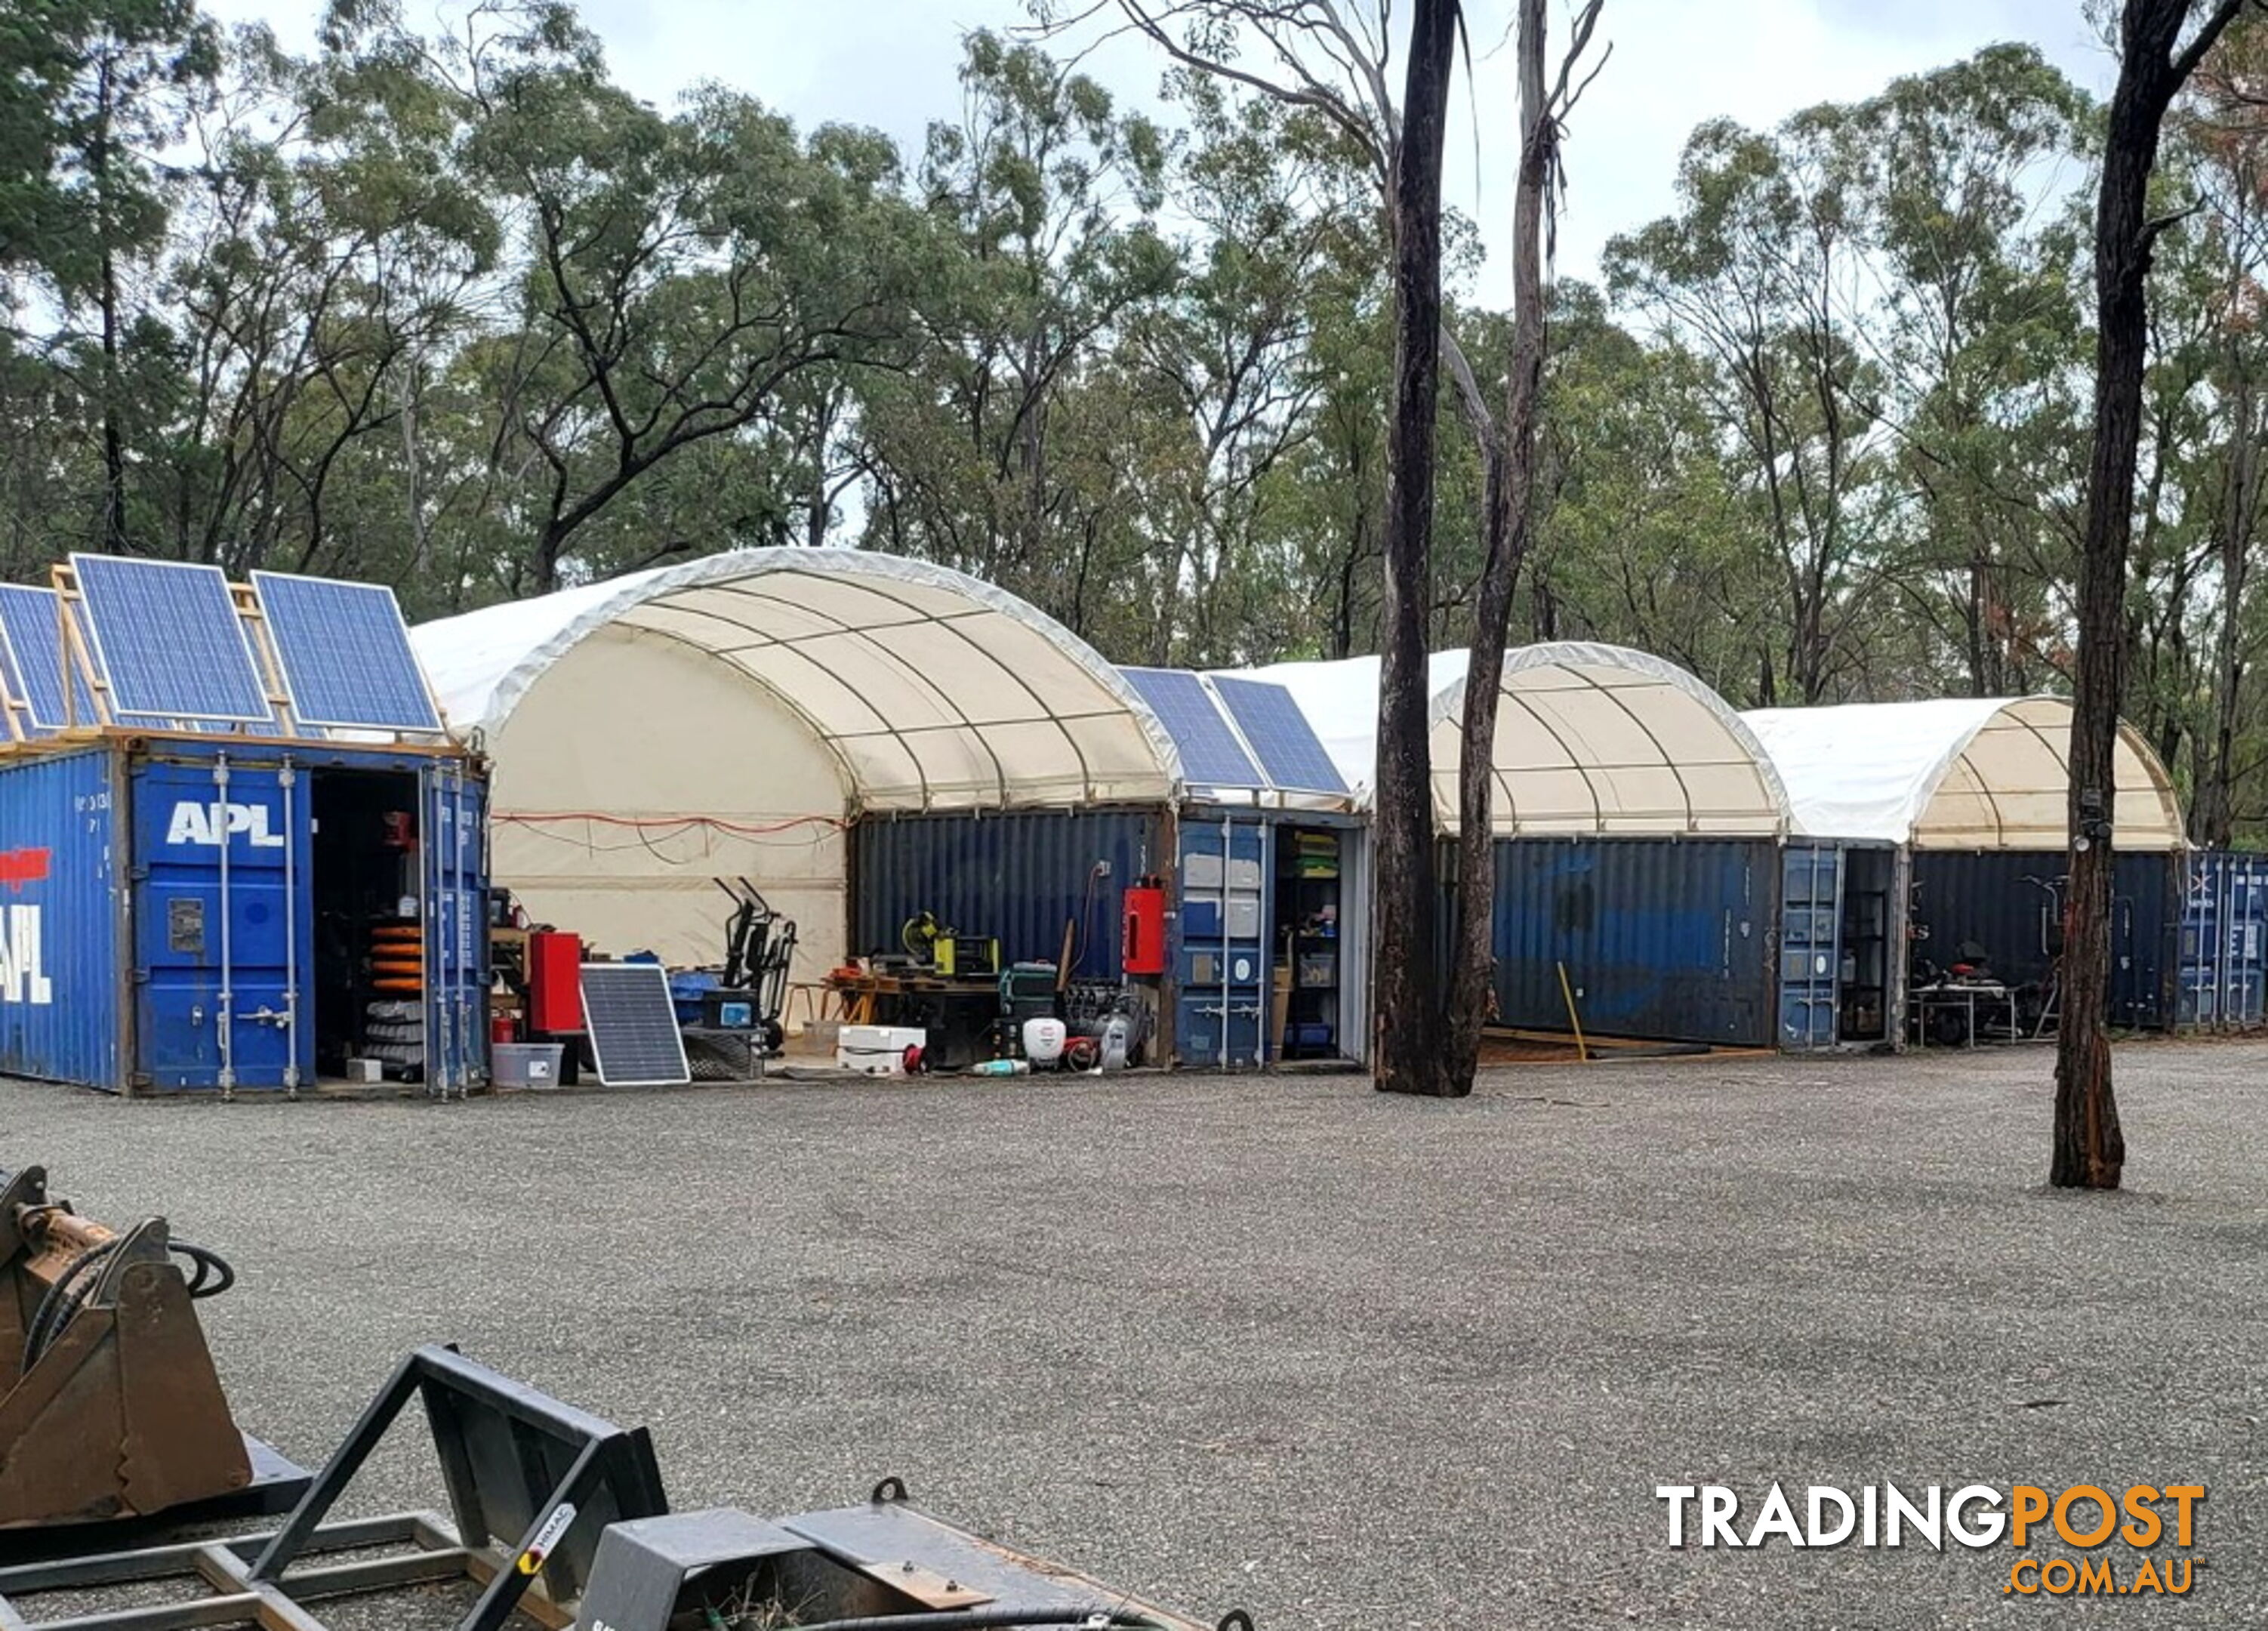 New 6m x 6m Container Shelter Workshop Igloo Dome with End Wall